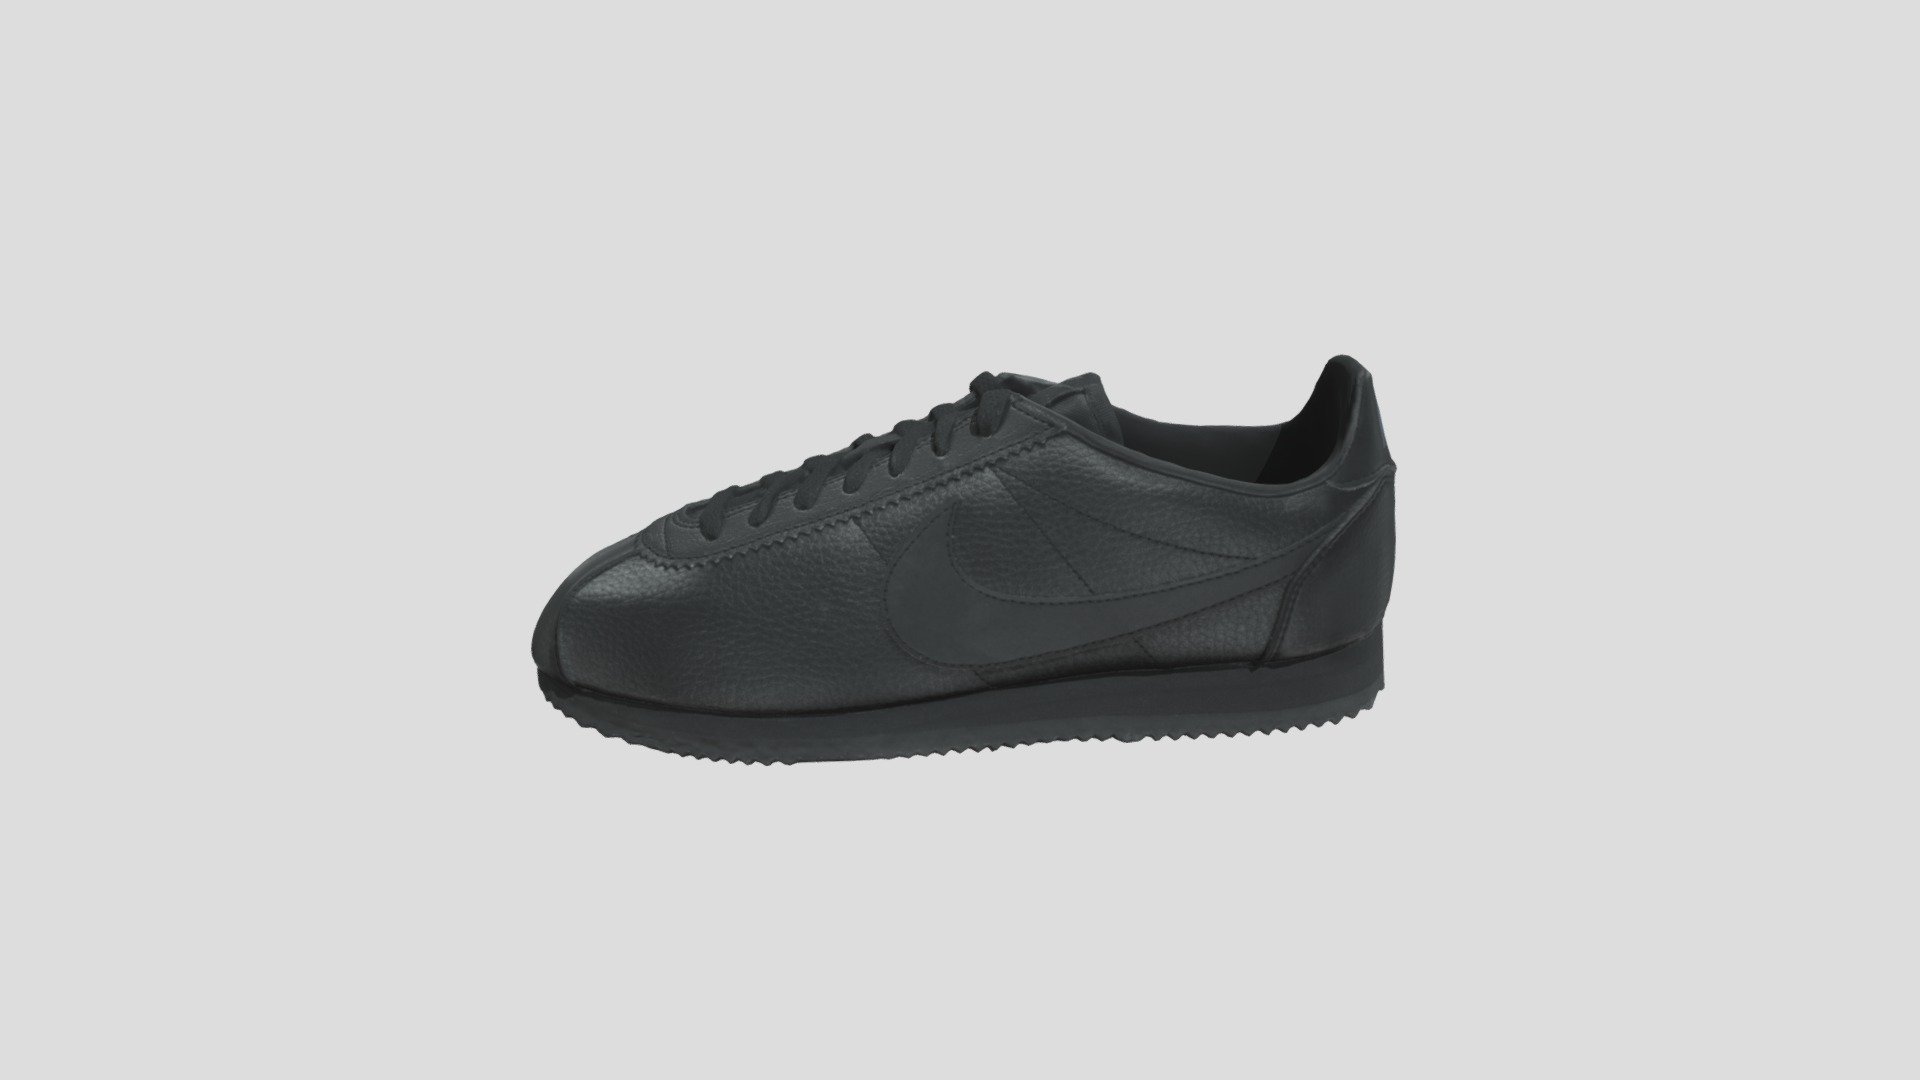 This model was created firstly by 3D scanning on retail version, and then being detail-improved manually, thus a 1:1 repulica of the original
PBR ready
Low-poly
4K texture
Welcome to check out other models we have to offer. And we do accept custom orders as well :) - Nike Classic Cortez Leather 纯黑 阿甘_749571-002 - Buy Royalty Free 3D model by TRARGUS 3d model